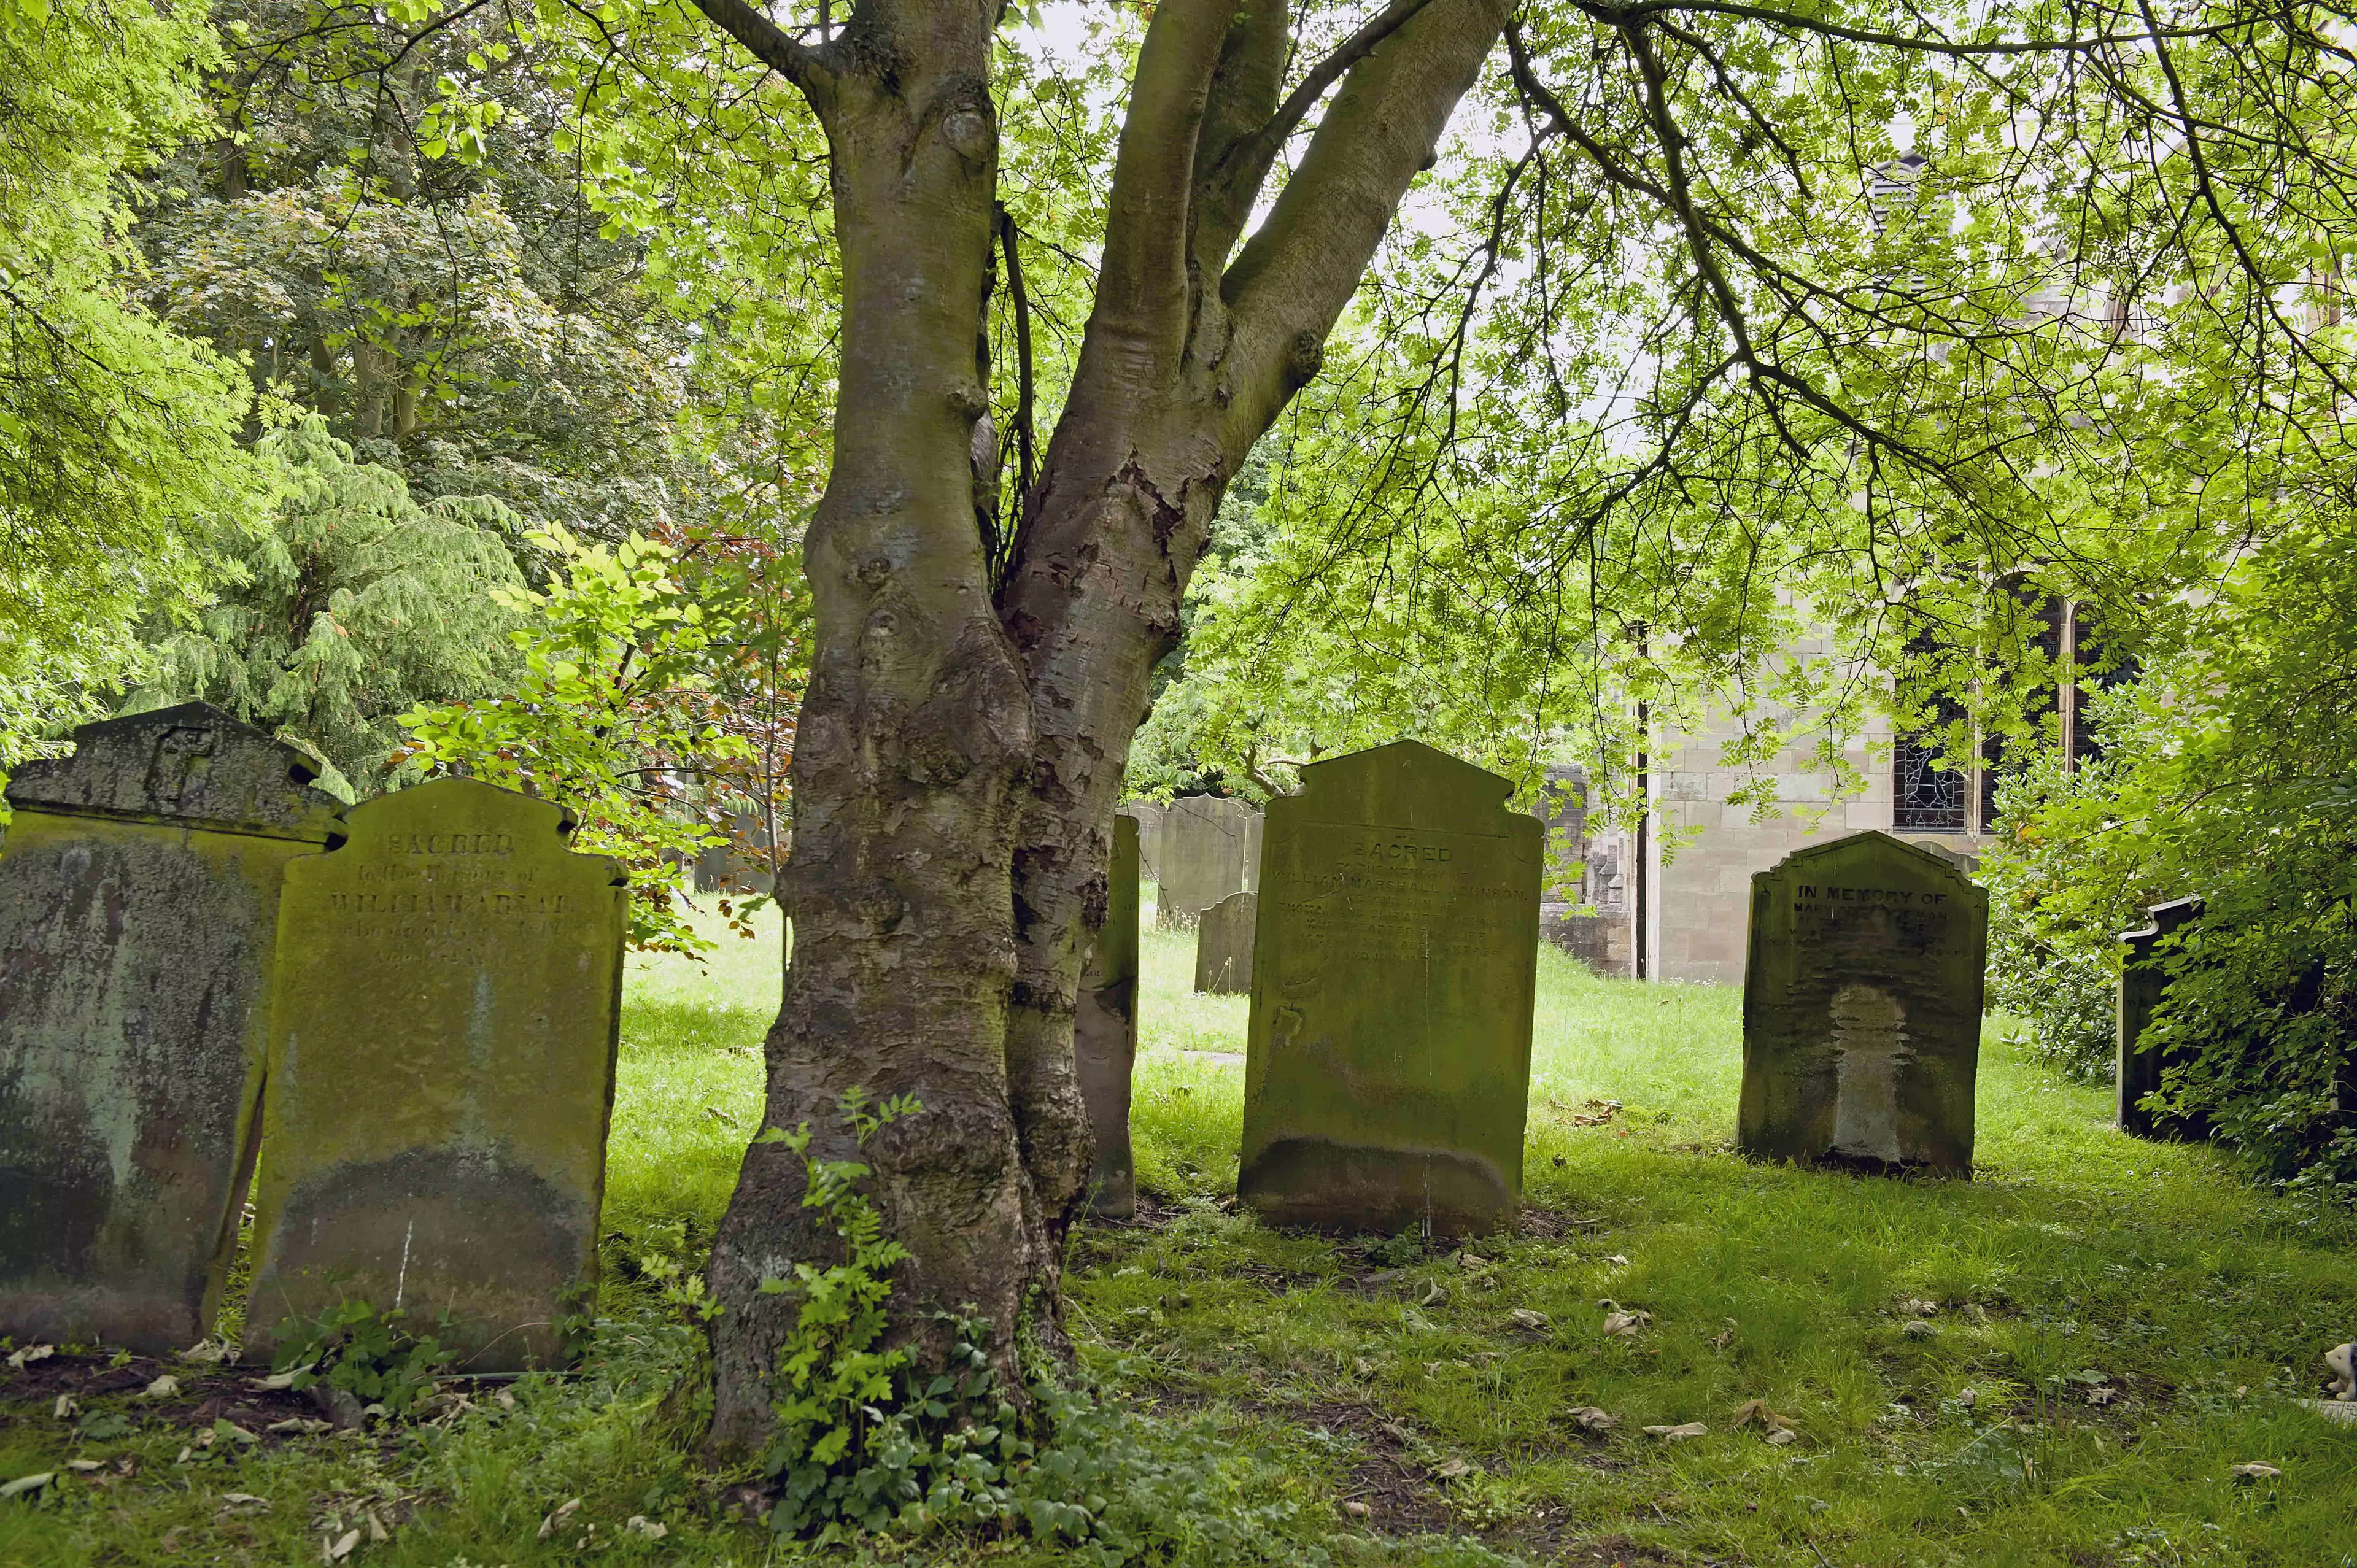 Covid restrictions limit the number of people who can attend funerals in the UK.